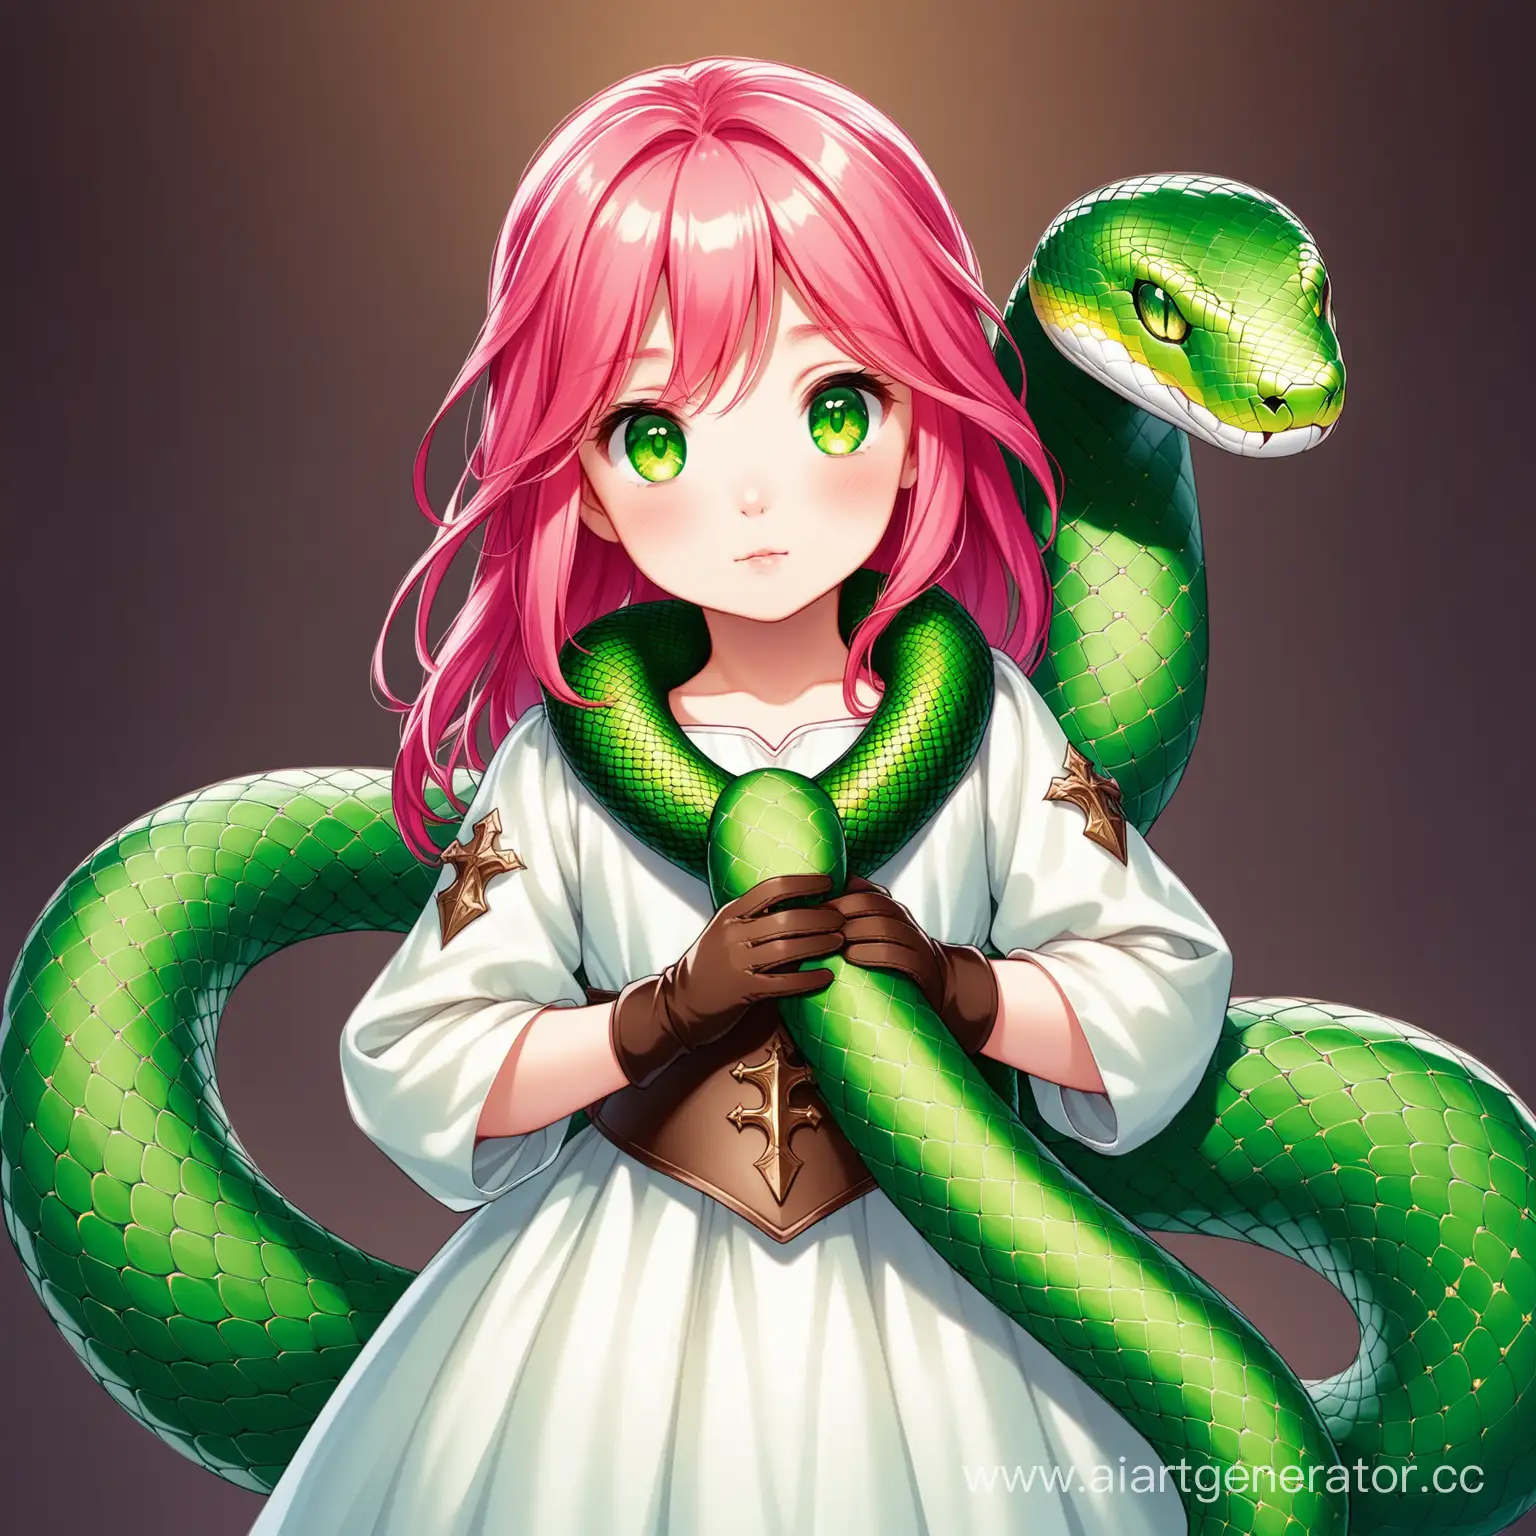 MedievalInspired-5YearOld-Girl-with-Snake-and-White-Dress